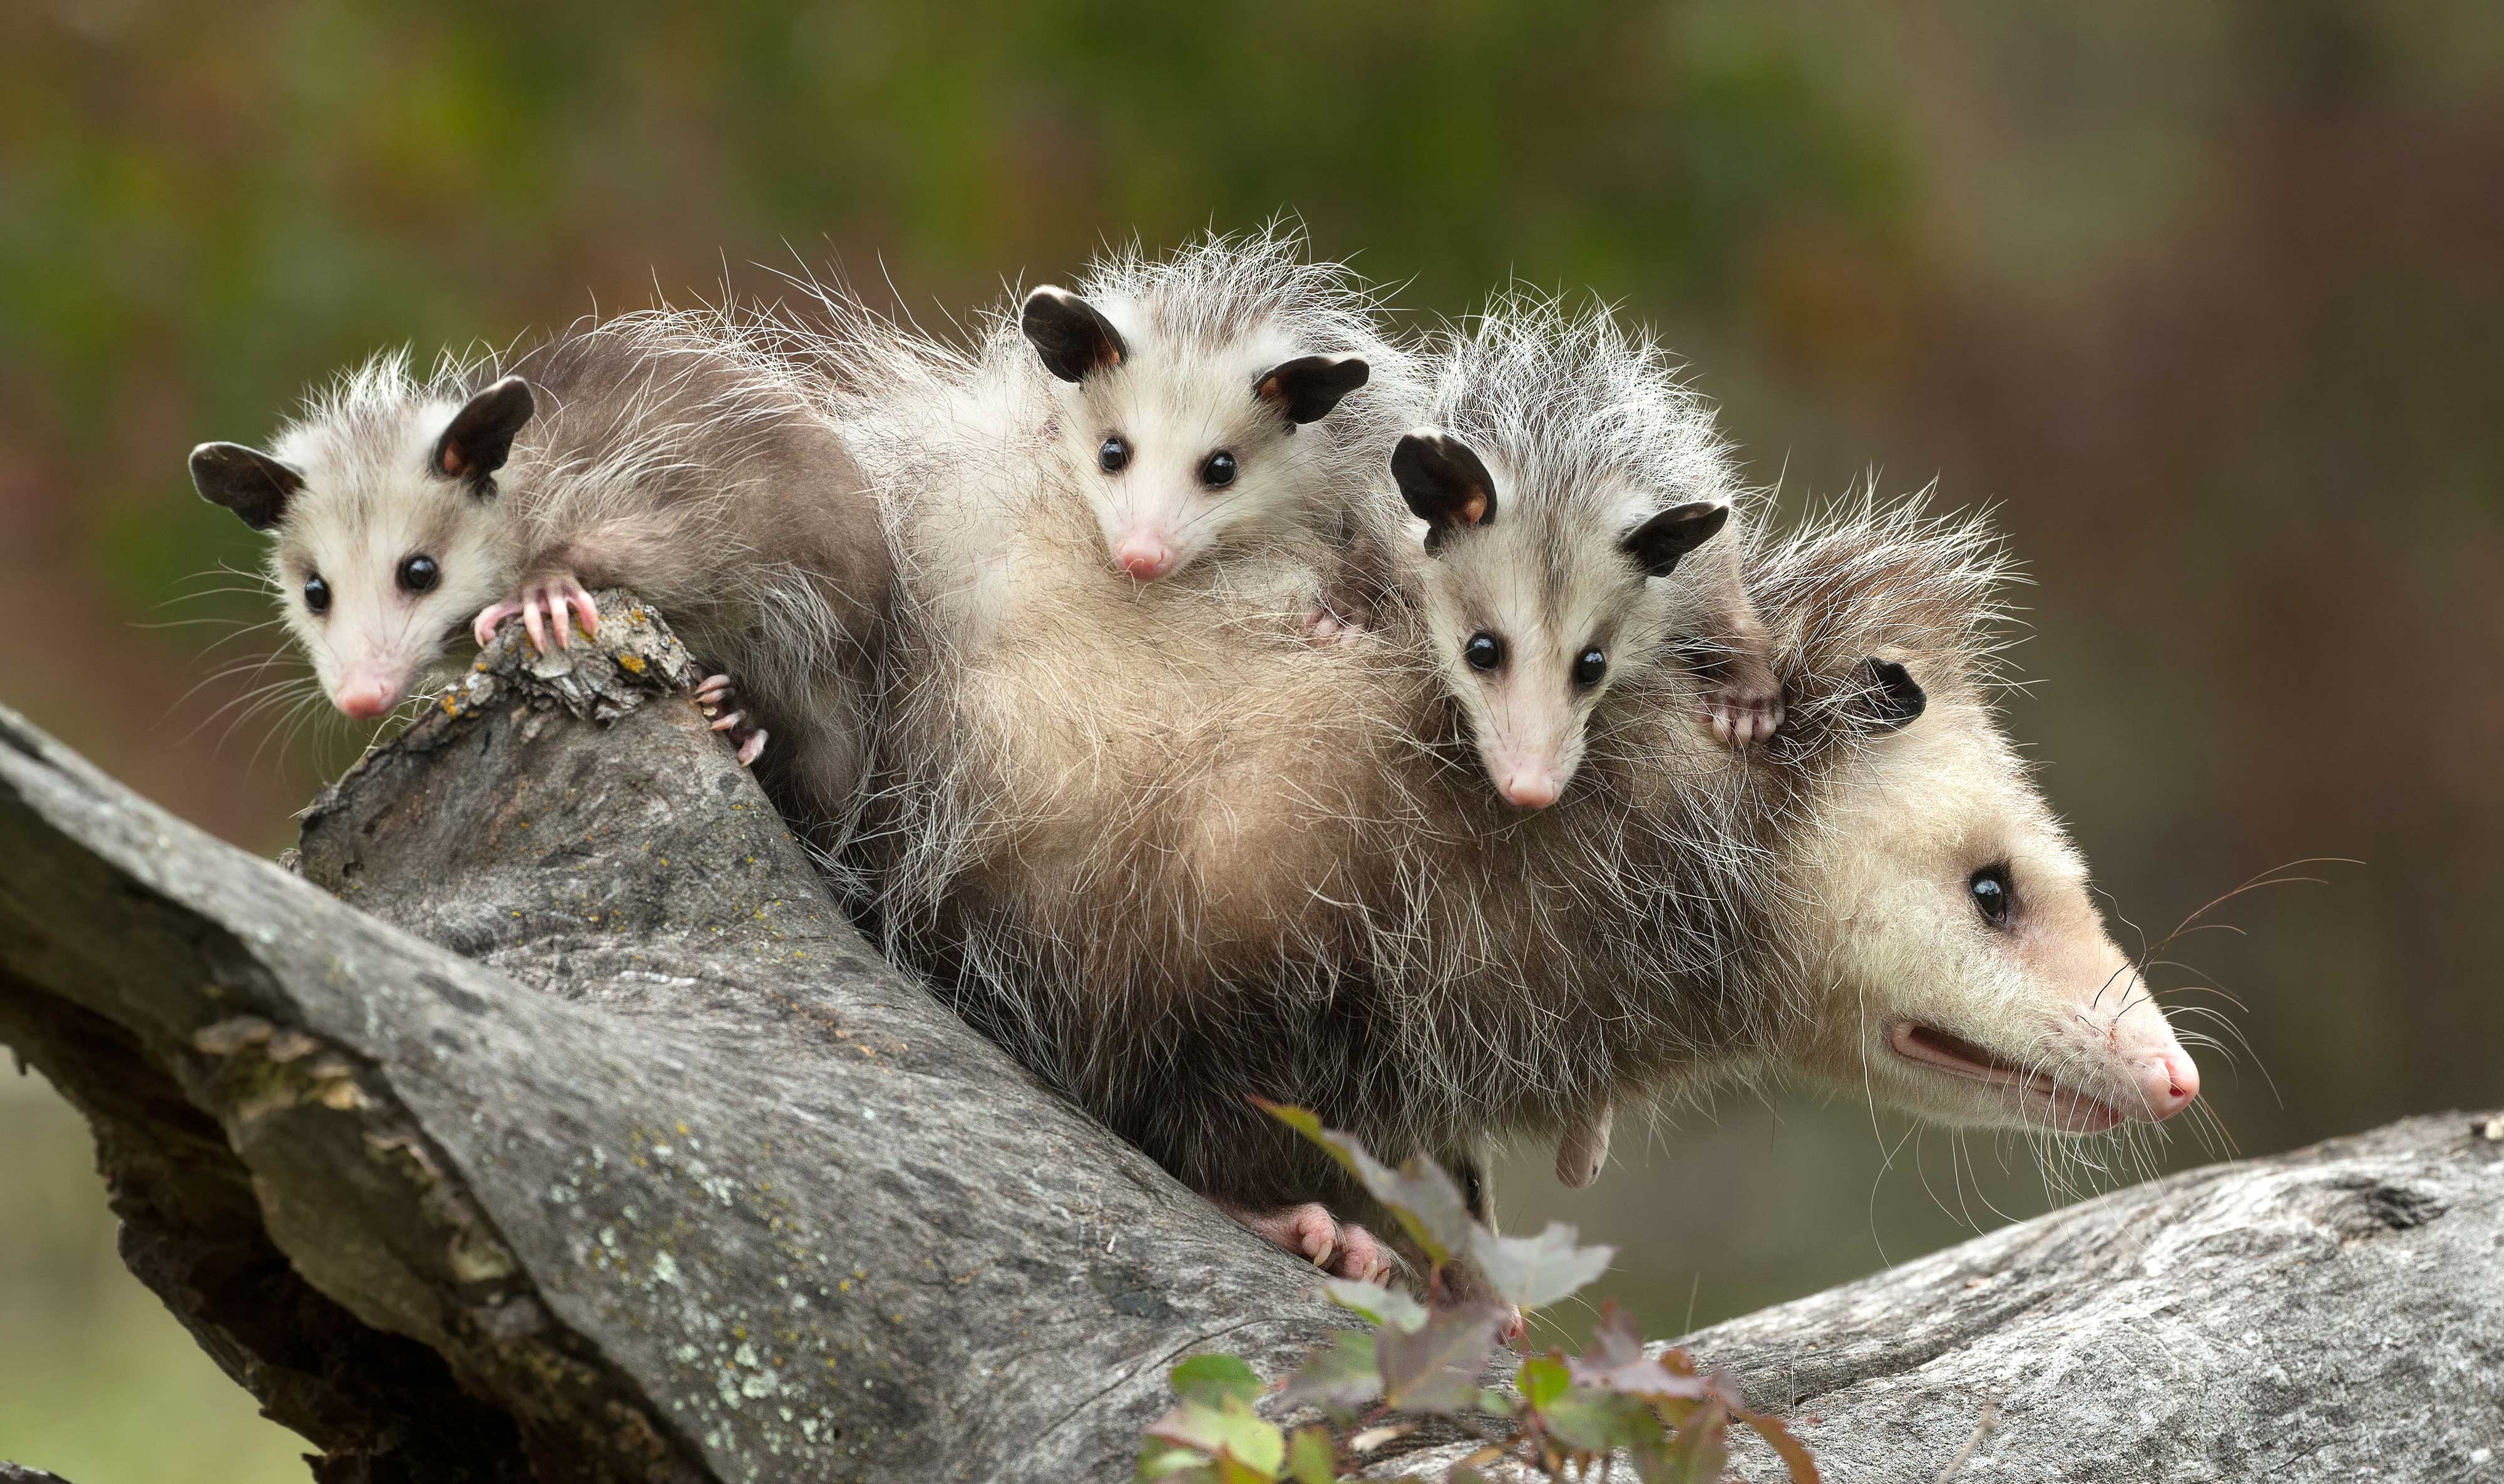 An opossum carrying babies on her back.